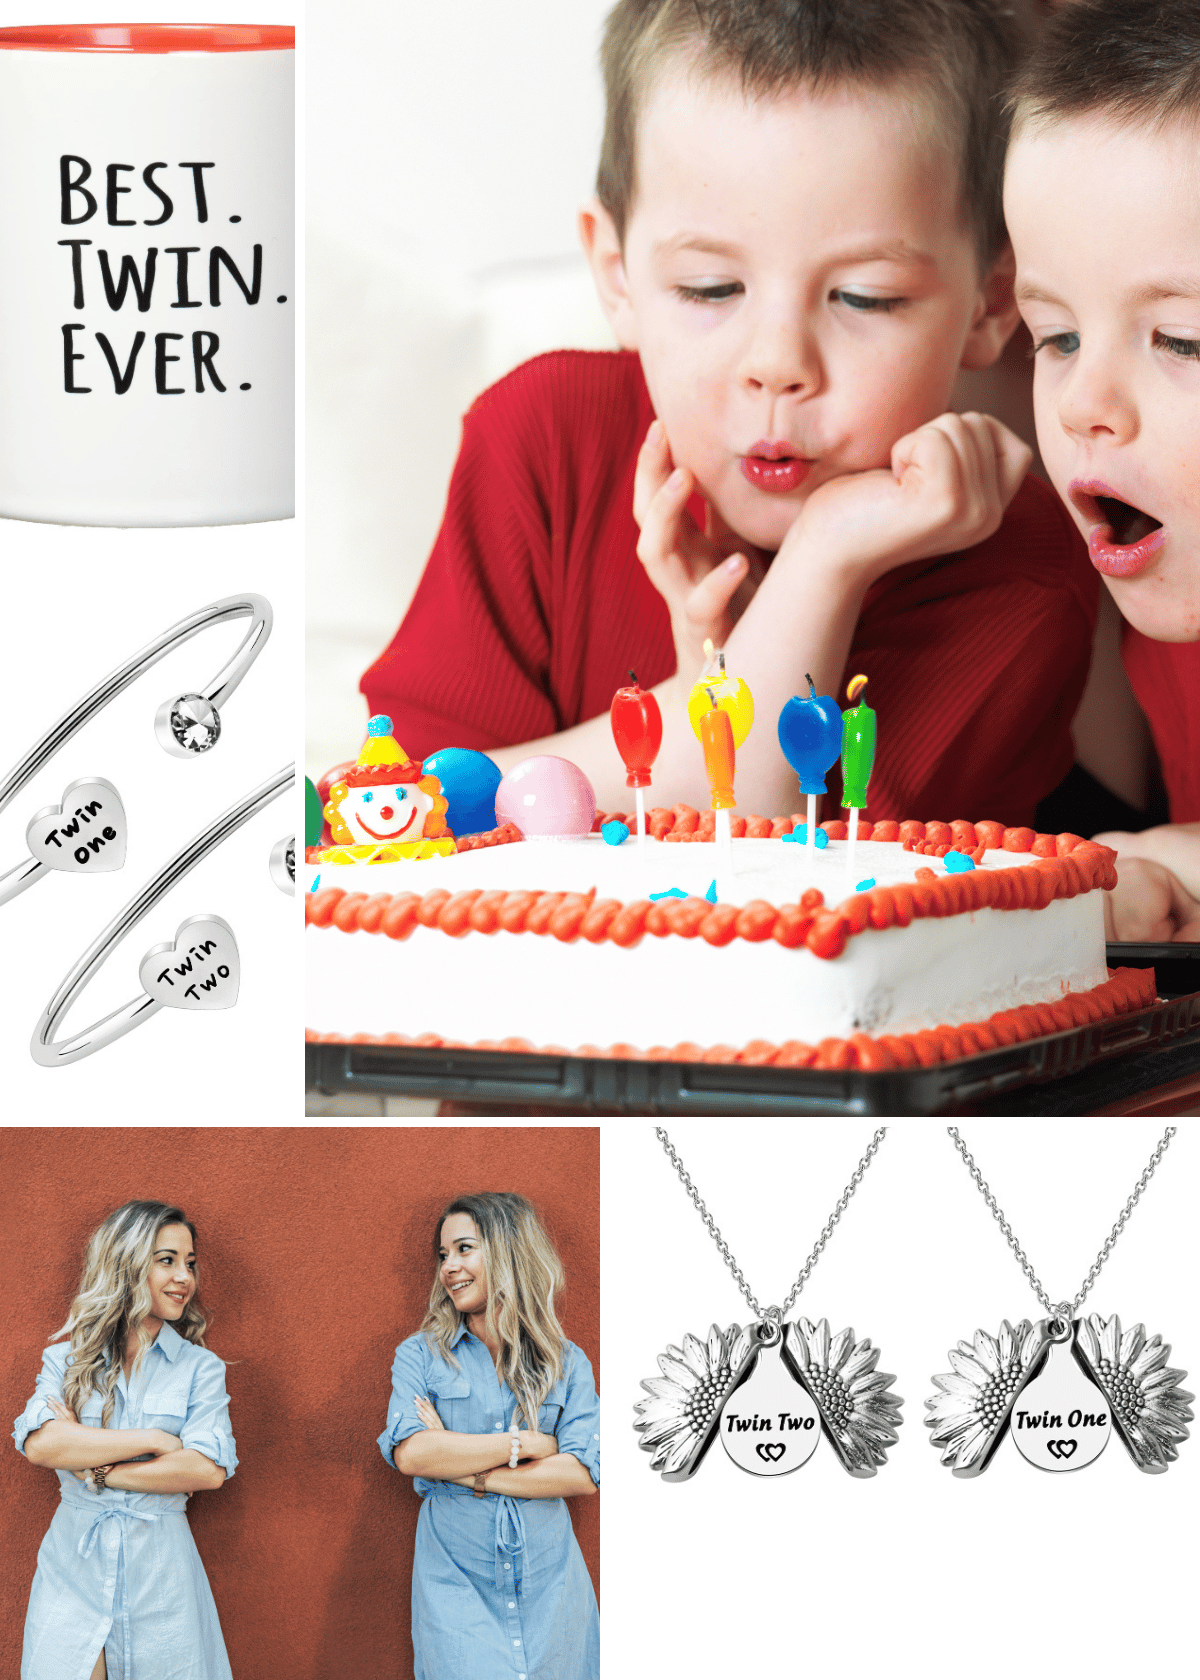 The Best Birthday Gifts For Twins: Picks They'll Love